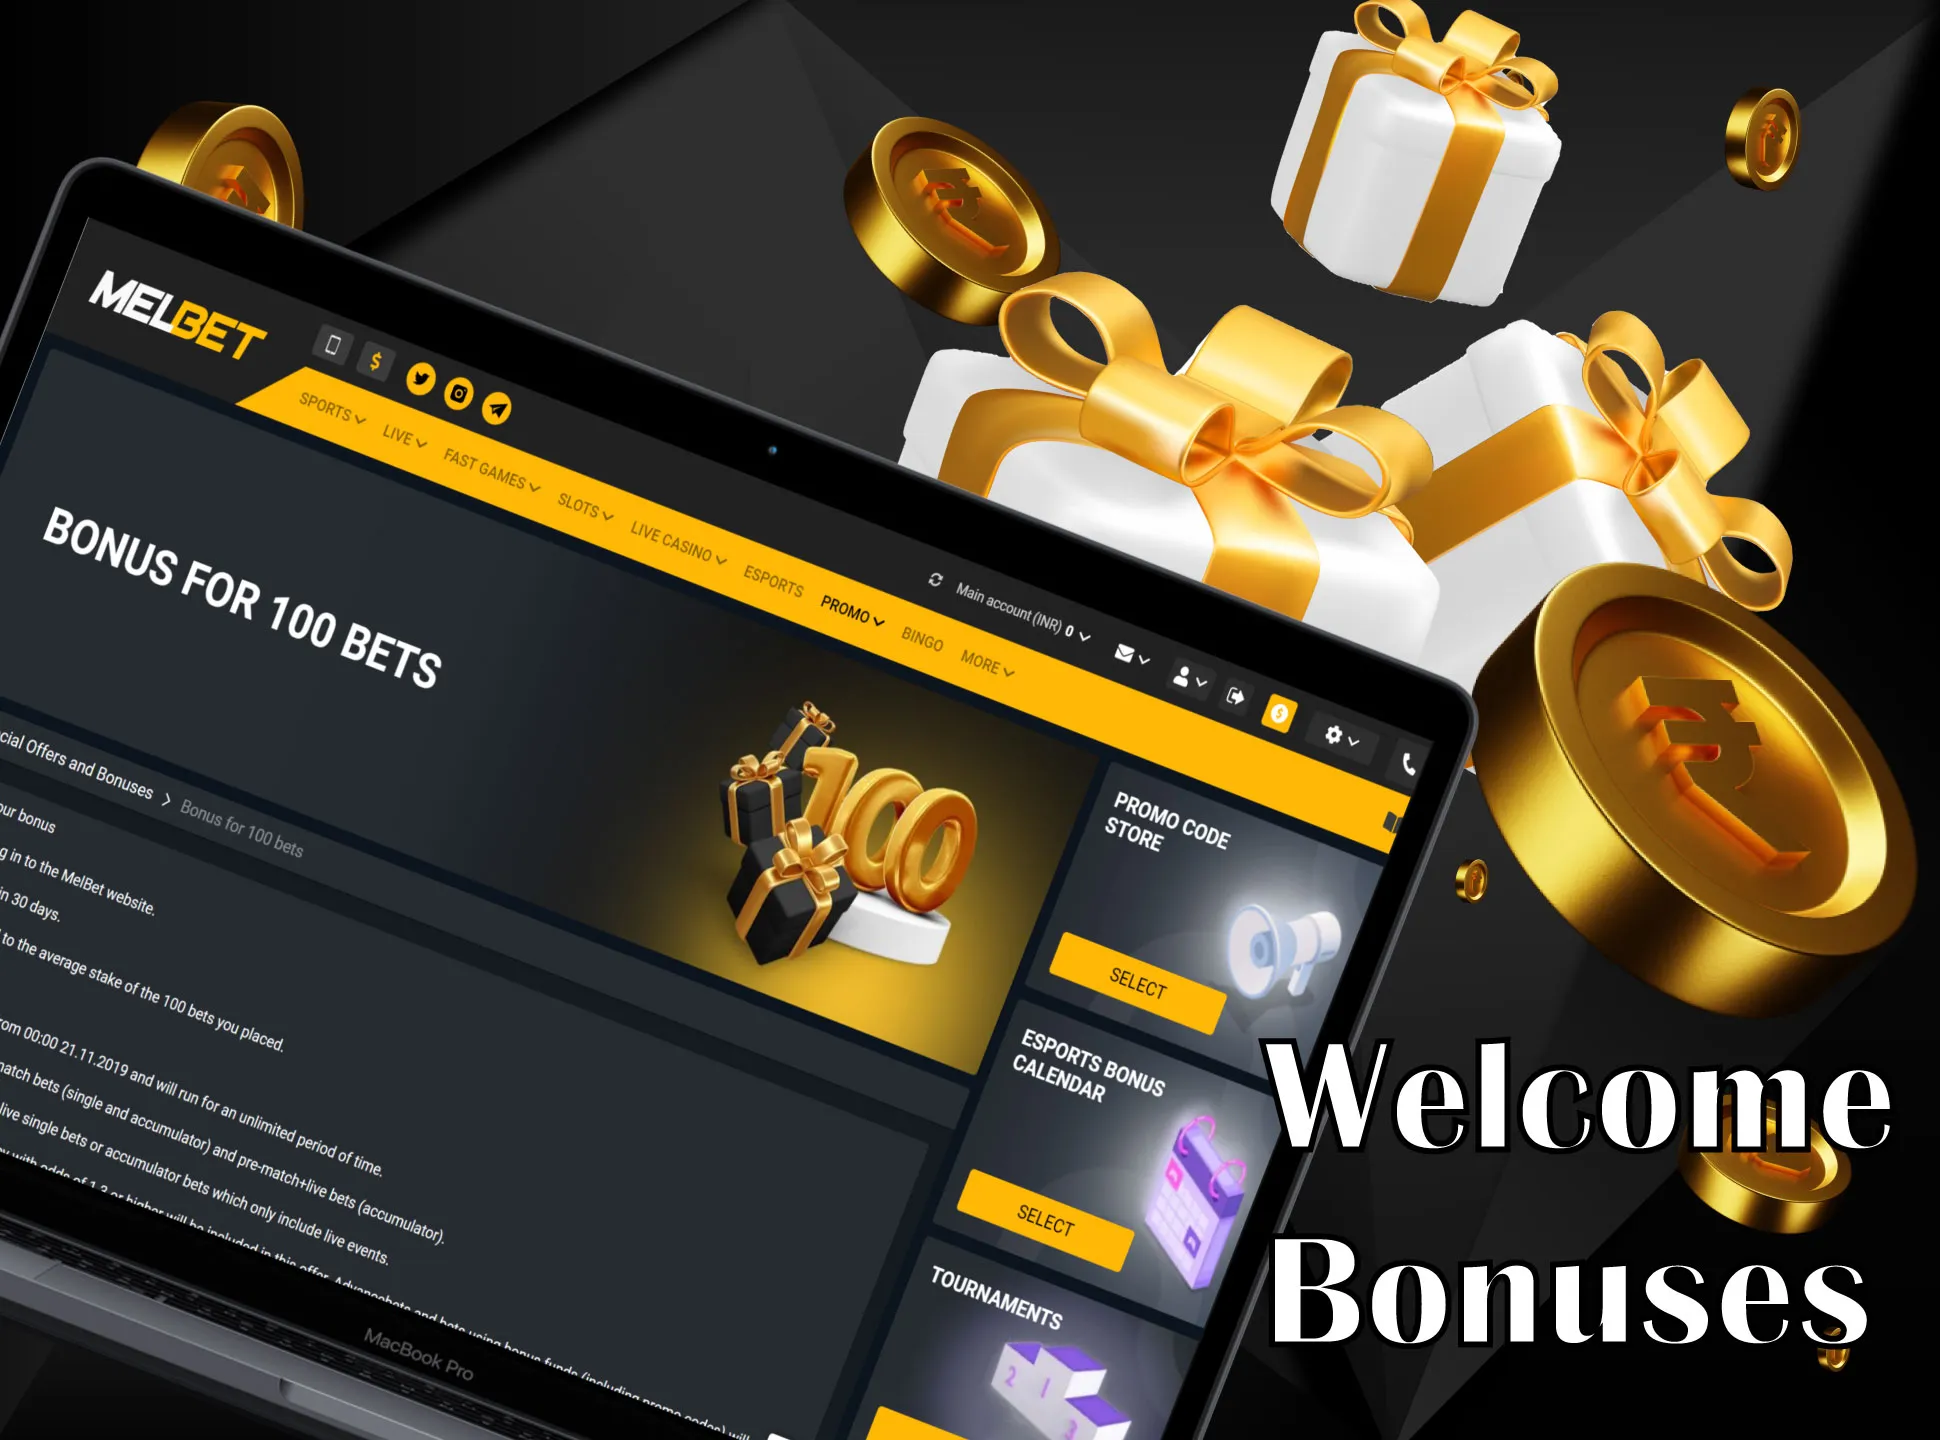 Welcome bonuses are given after the first deposit on a betting company.